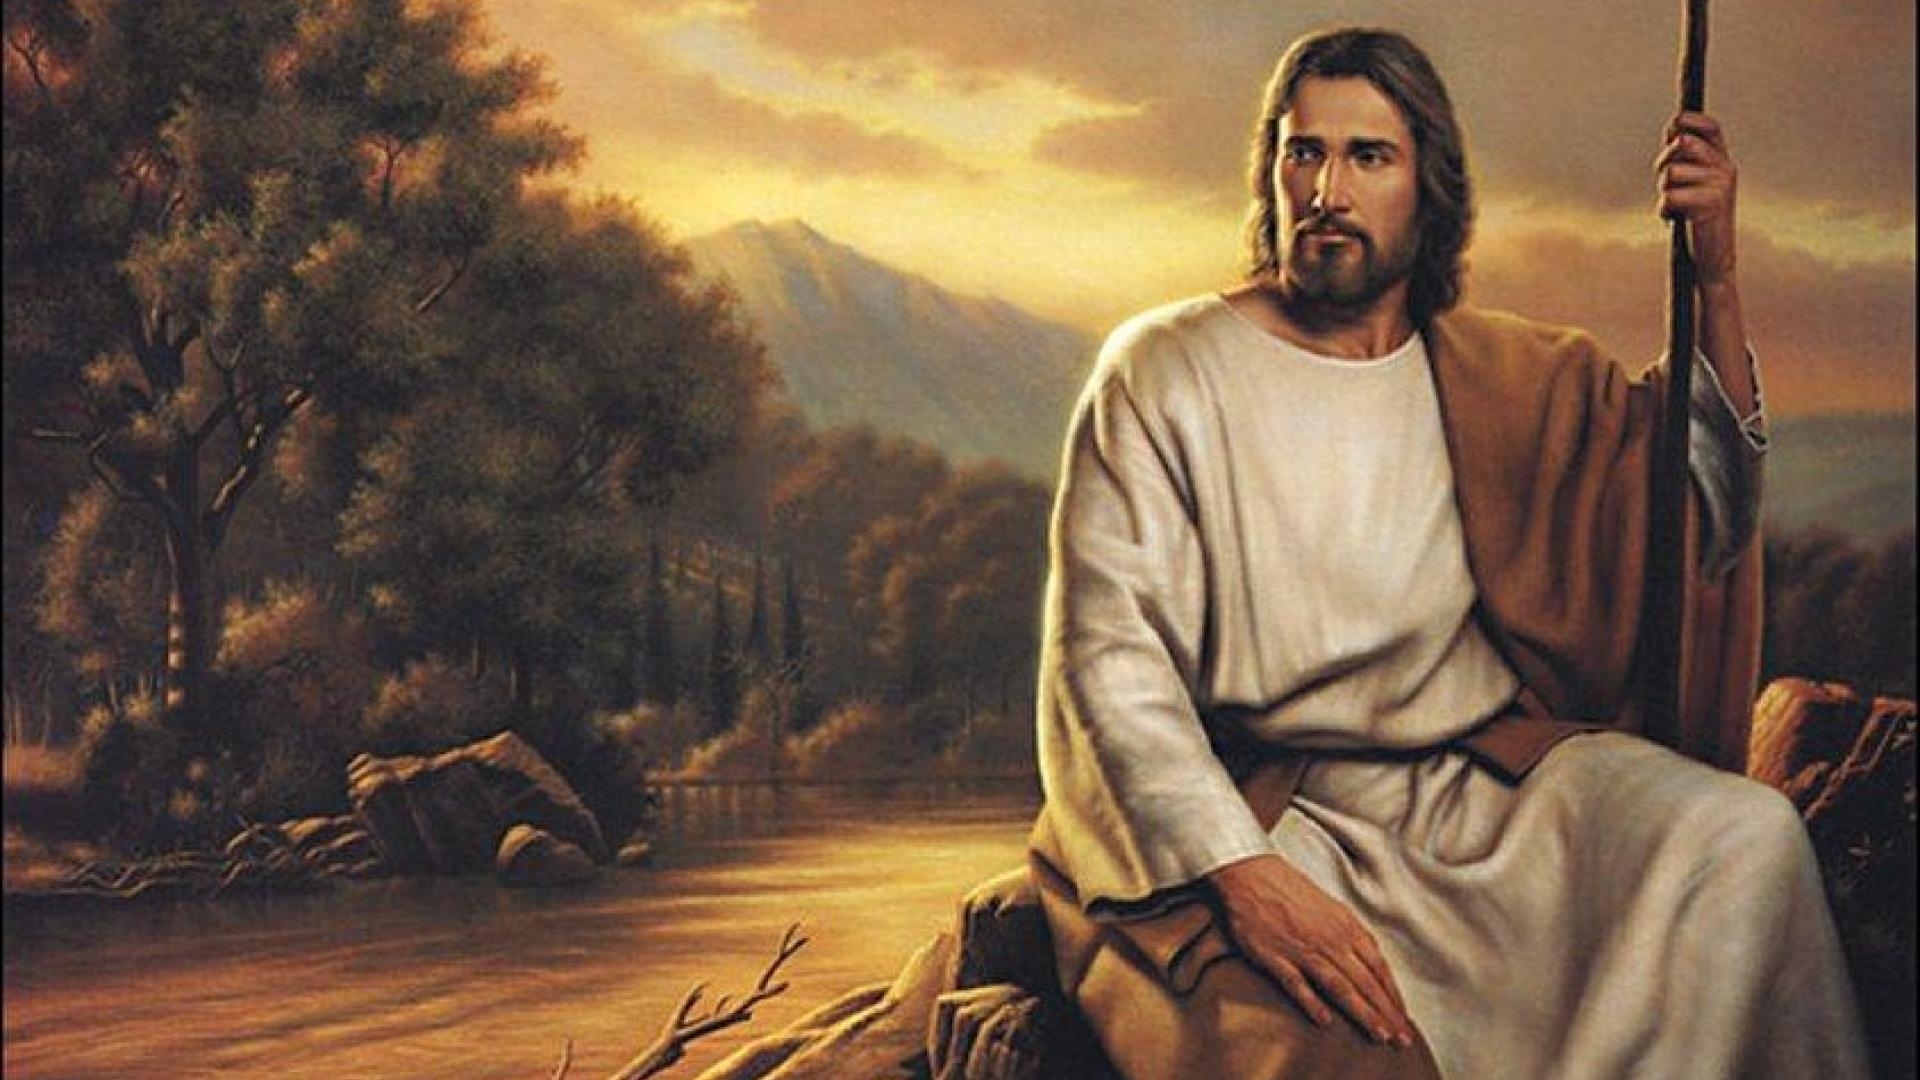 10 Latest Jesus Wallpaper Hd Widescreen FULL HD 1920×1080 For PC Background